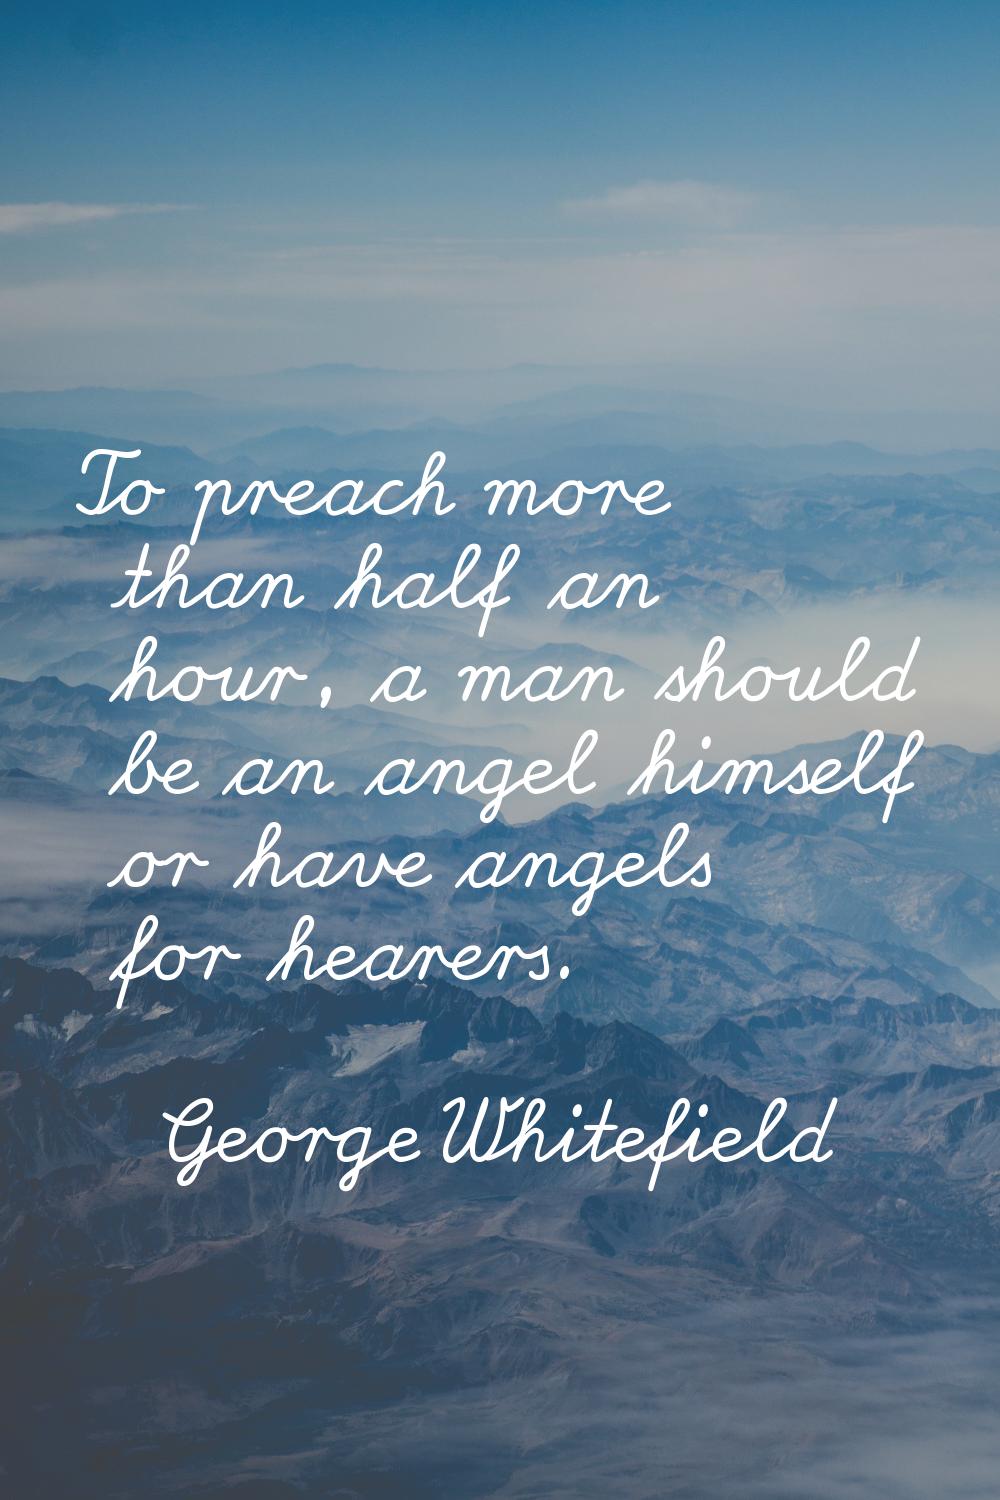 To preach more than half an hour, a man should be an angel himself or have angels for hearers.